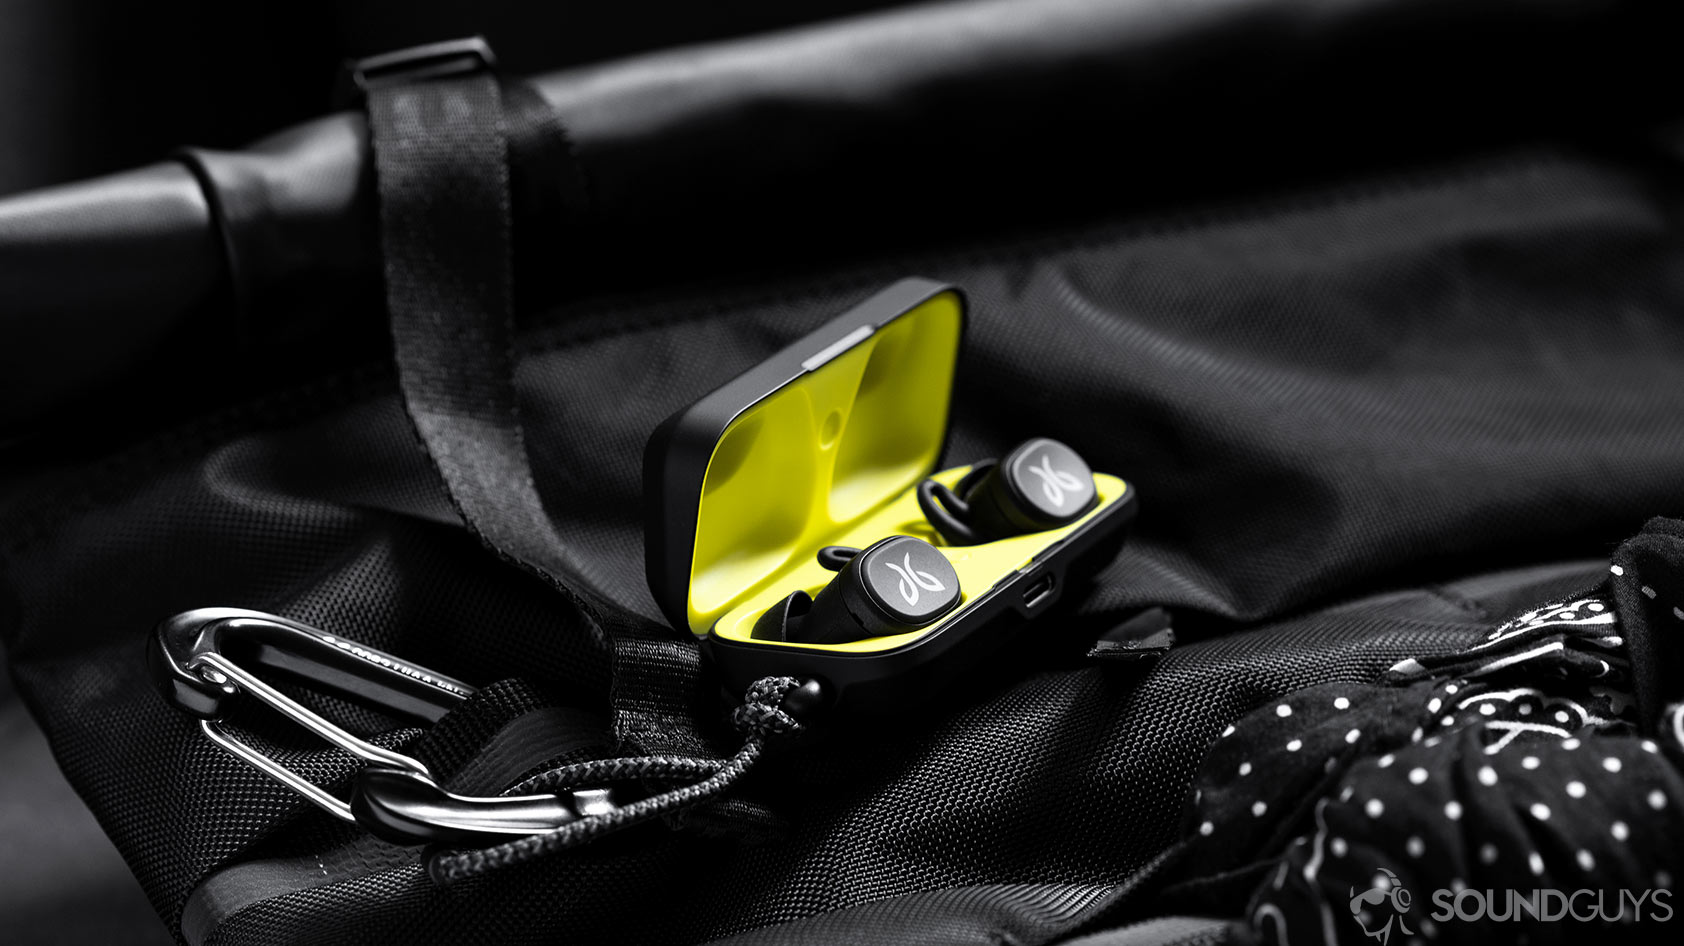 A photo of the Jaybird Vista earbuds in charging case which is open and on a Chrome backpack.